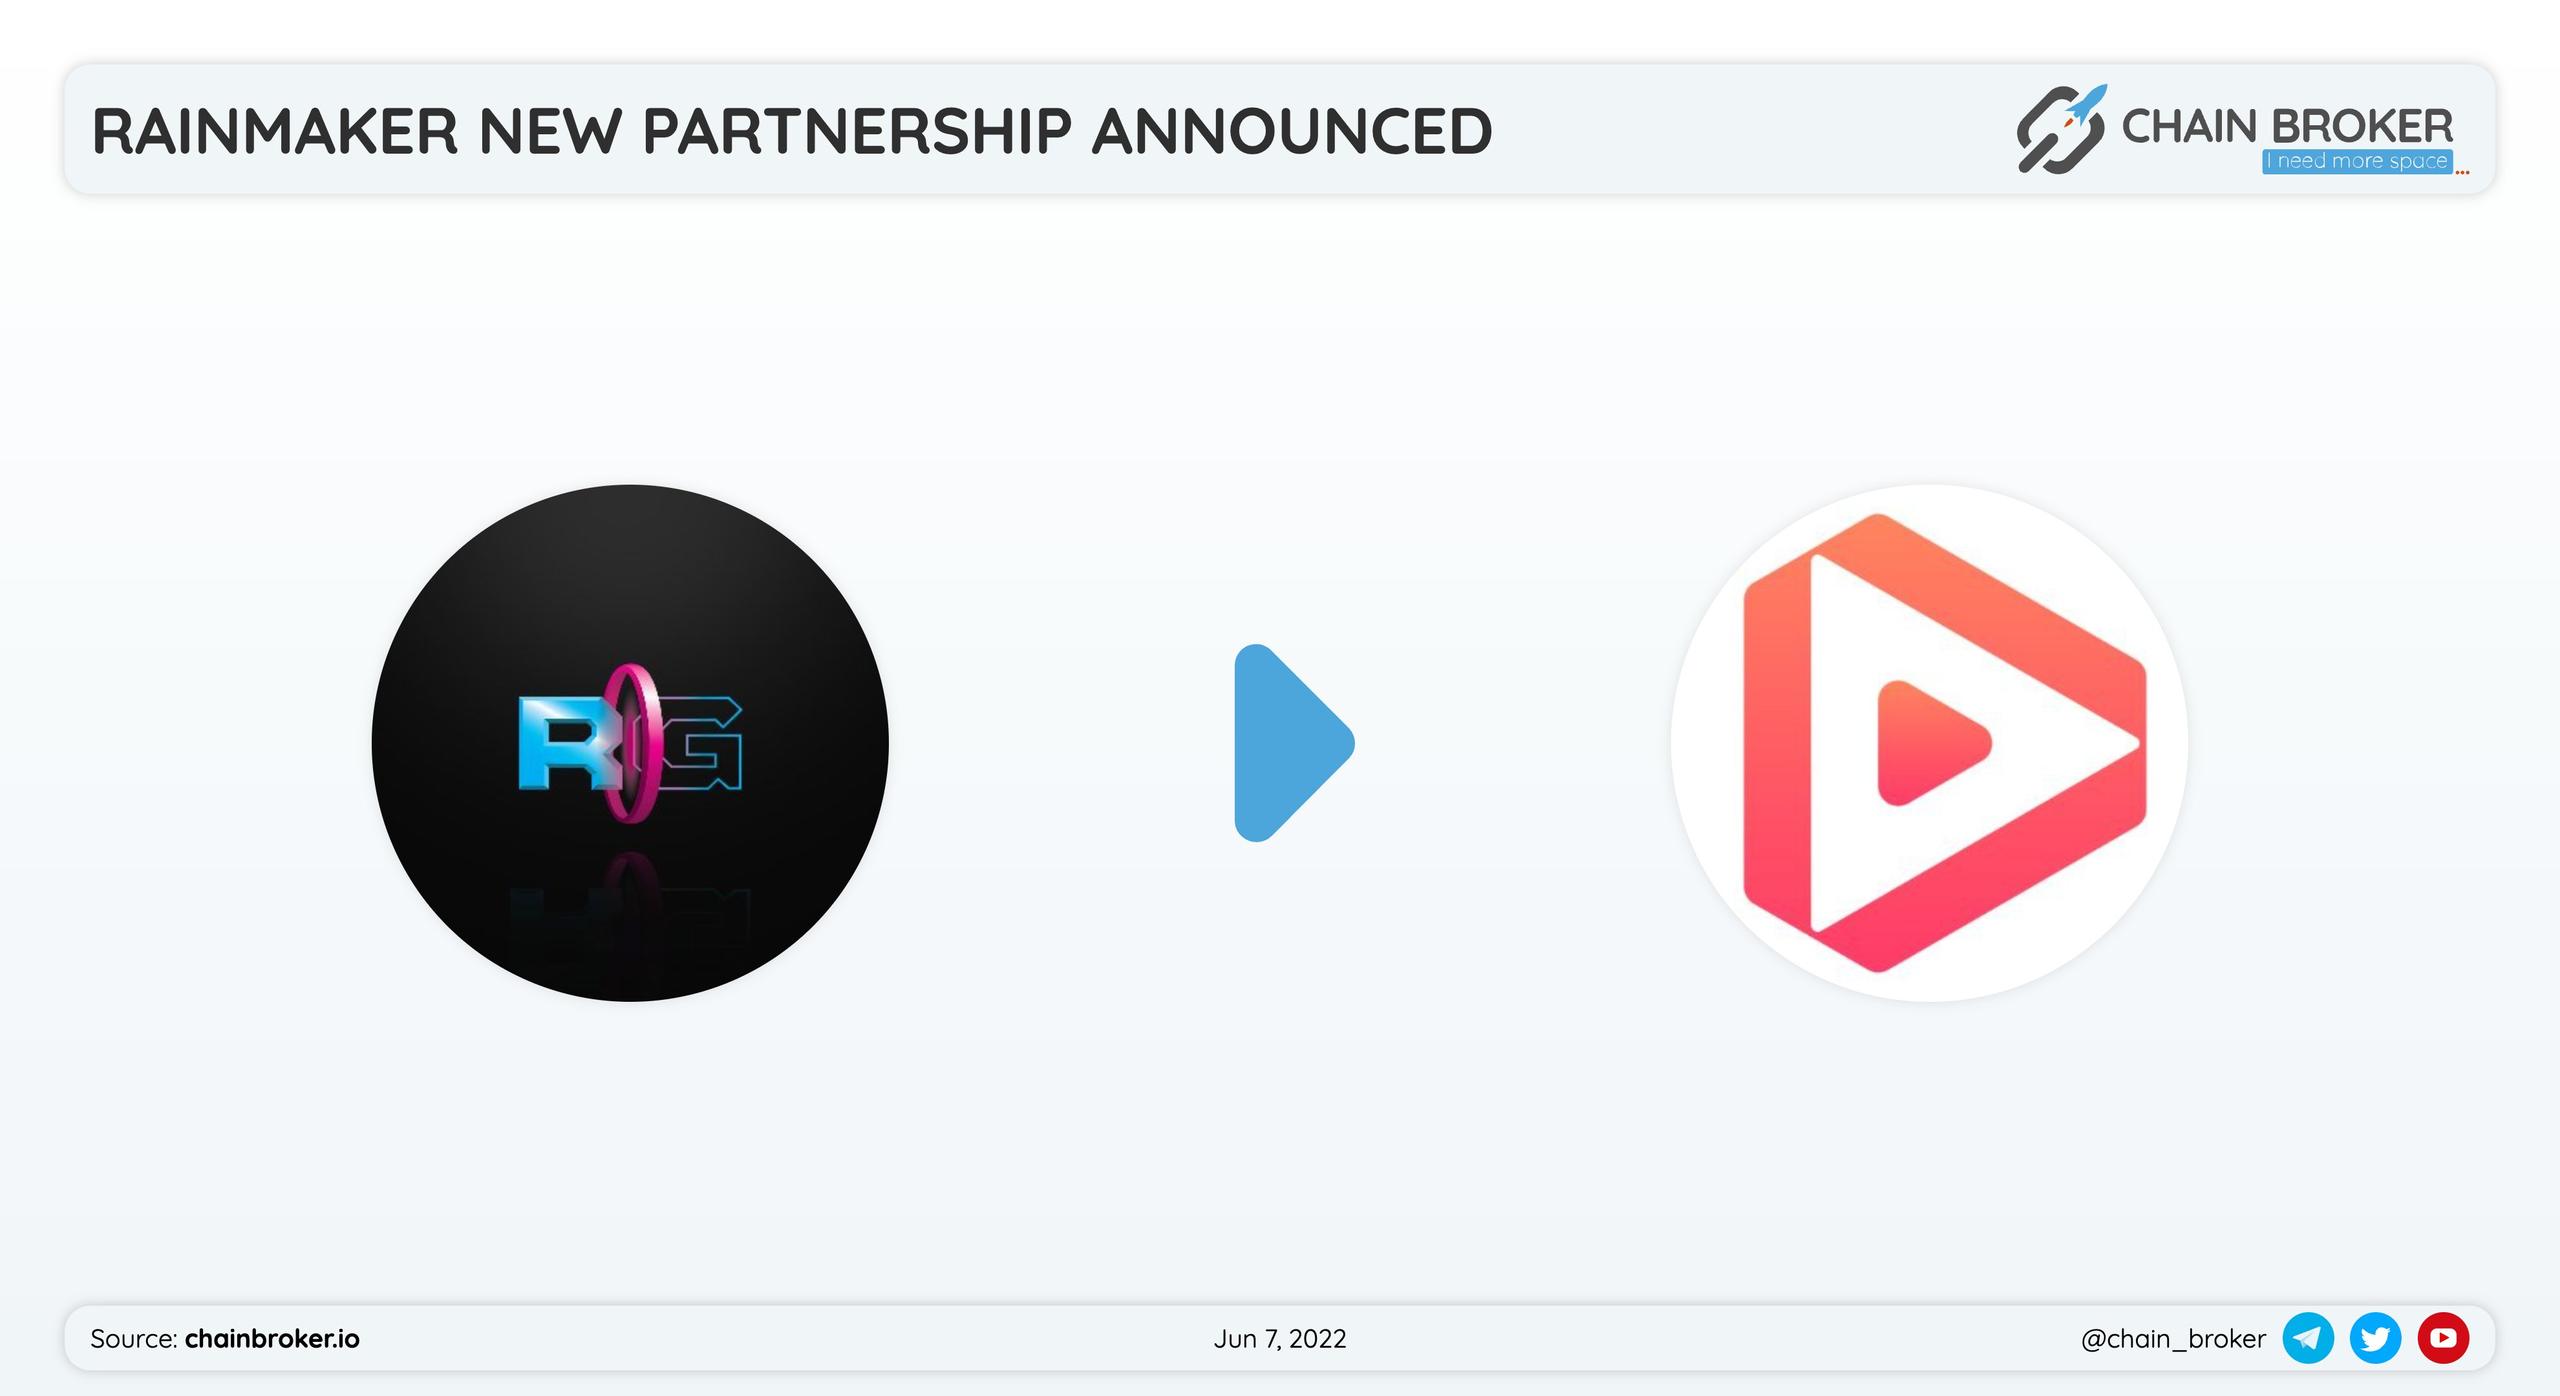 Rainmaker has partnered with Dotmooves